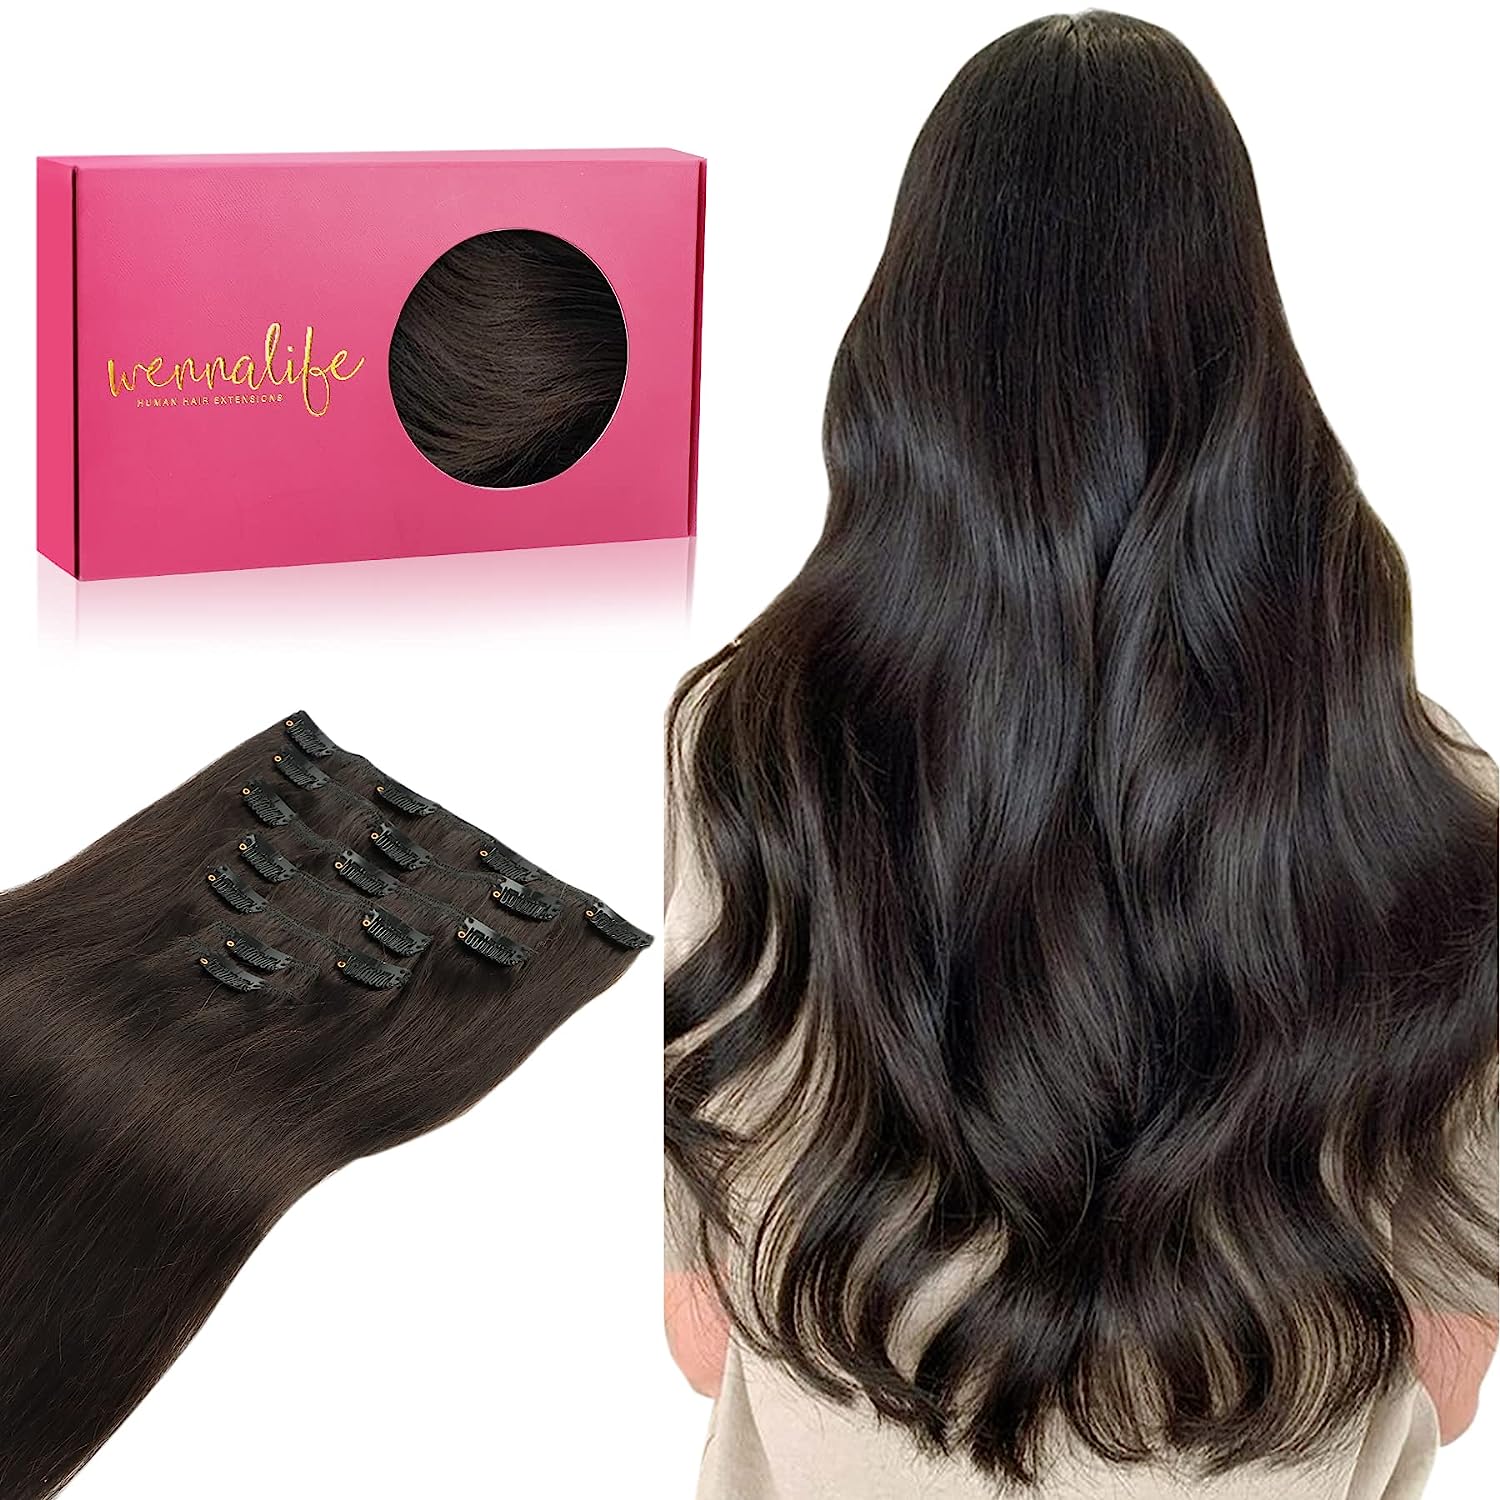 WENNALIFE Clip in Human Hair Extensions, 14 Inch 120g [...]